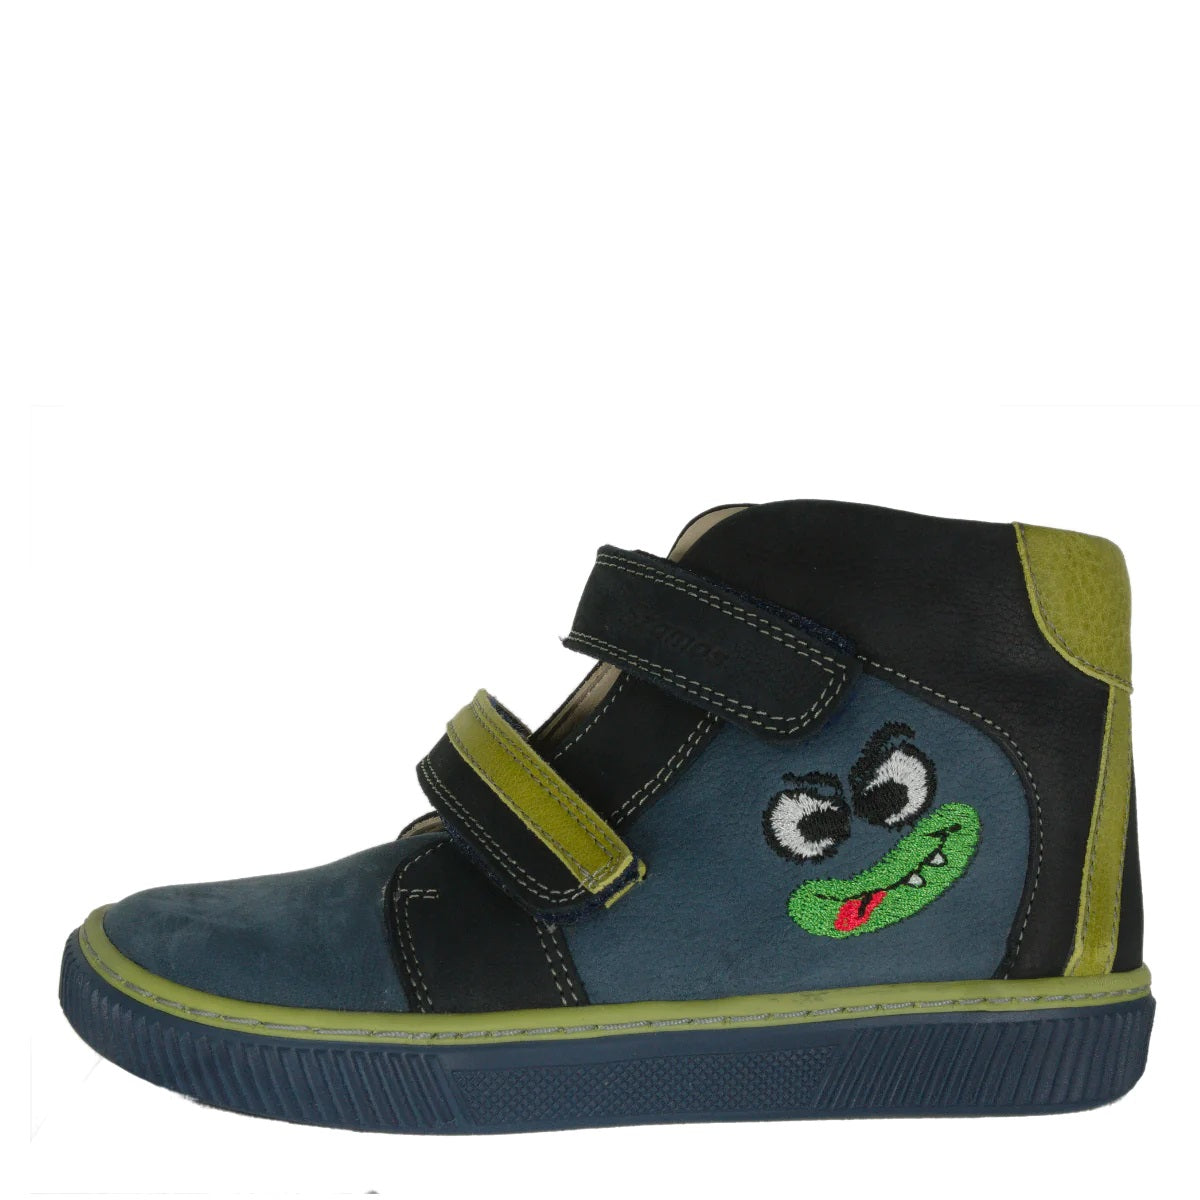 Szamos kid boy high-top shoes grey with green monster face little kid/big kid size